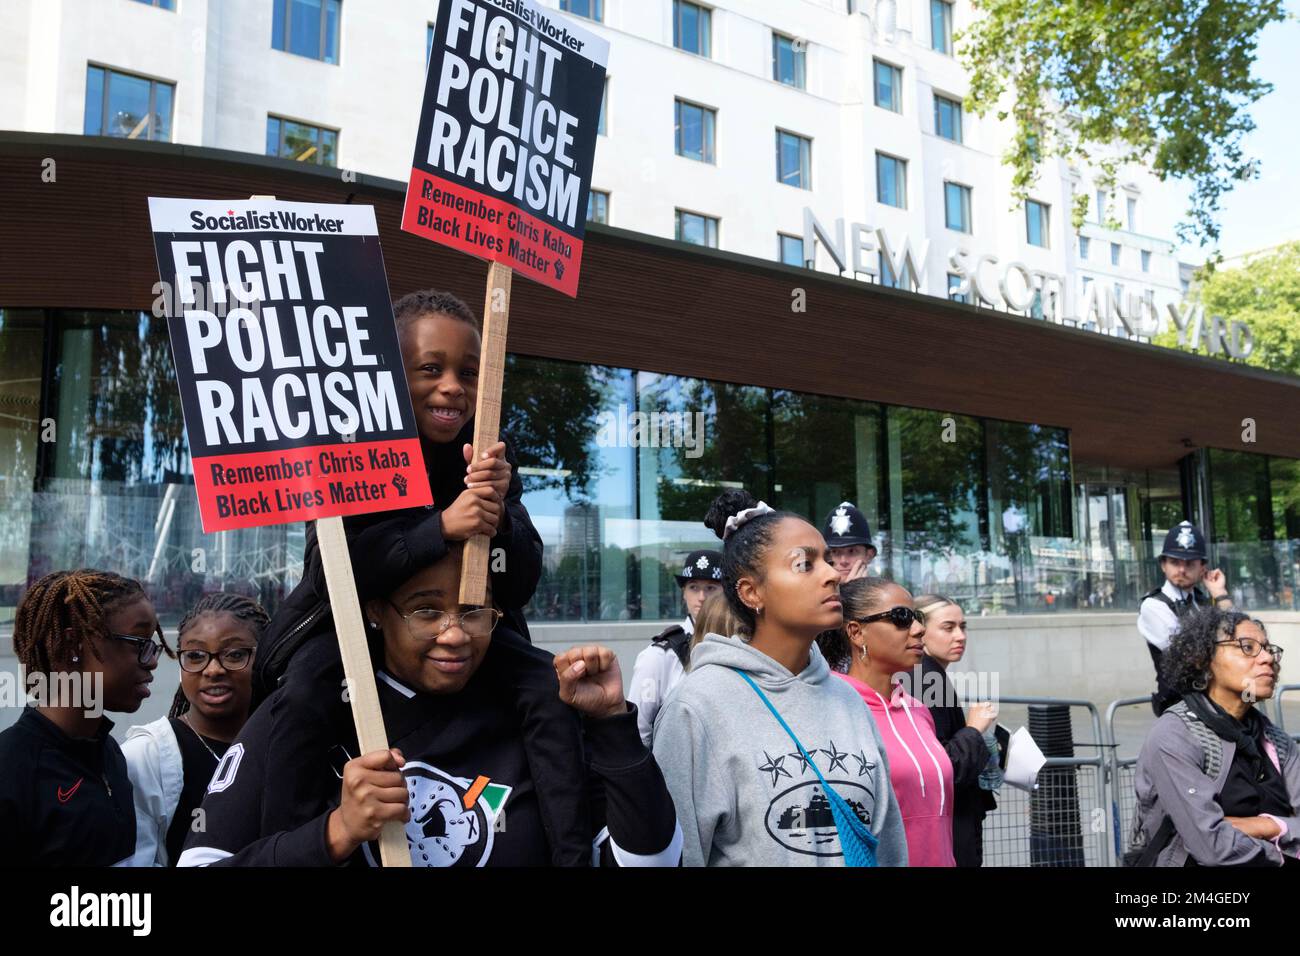 London, UK. 17 SEP, 2022. Multiple groups including Black Lives Matter gather in front of New Scotland Yard to protest against the killing of Chris Kaba, who was fatally shot by a police officer on 5th September. Stock Photo